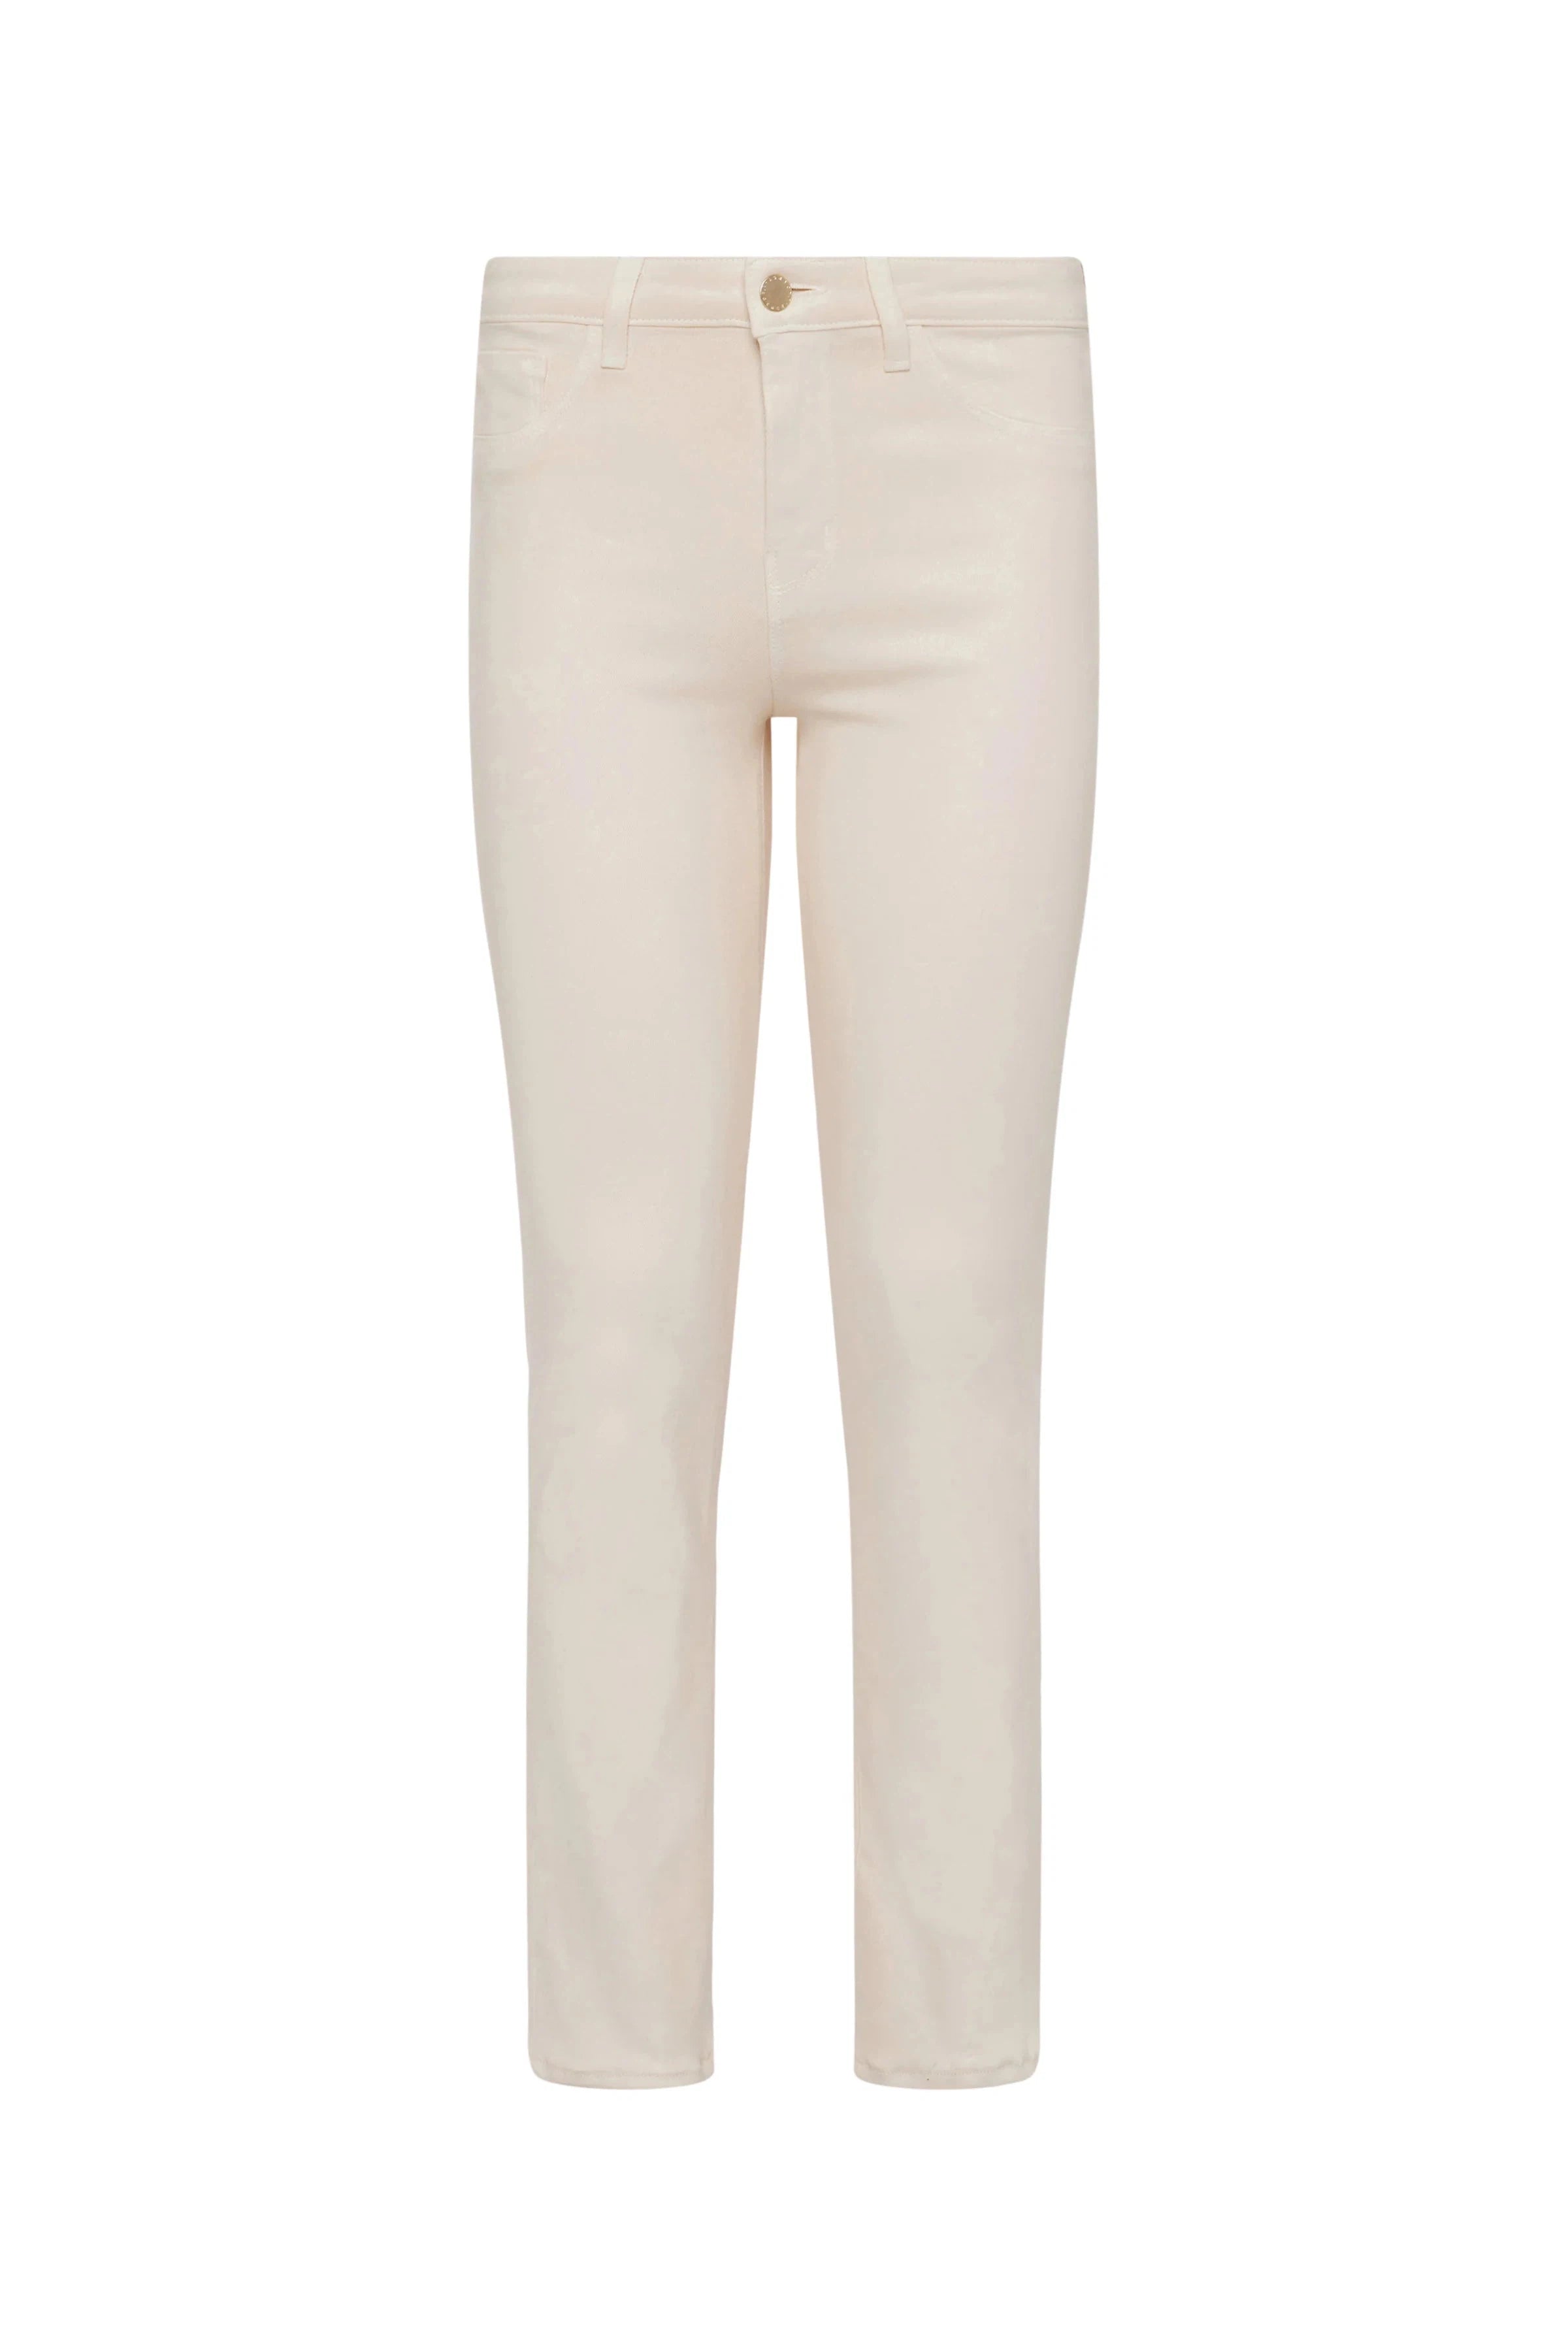 L'AGENCE GINNY H/R STRAIGHT BK ZIP IN FRENCH VANILLA COATED